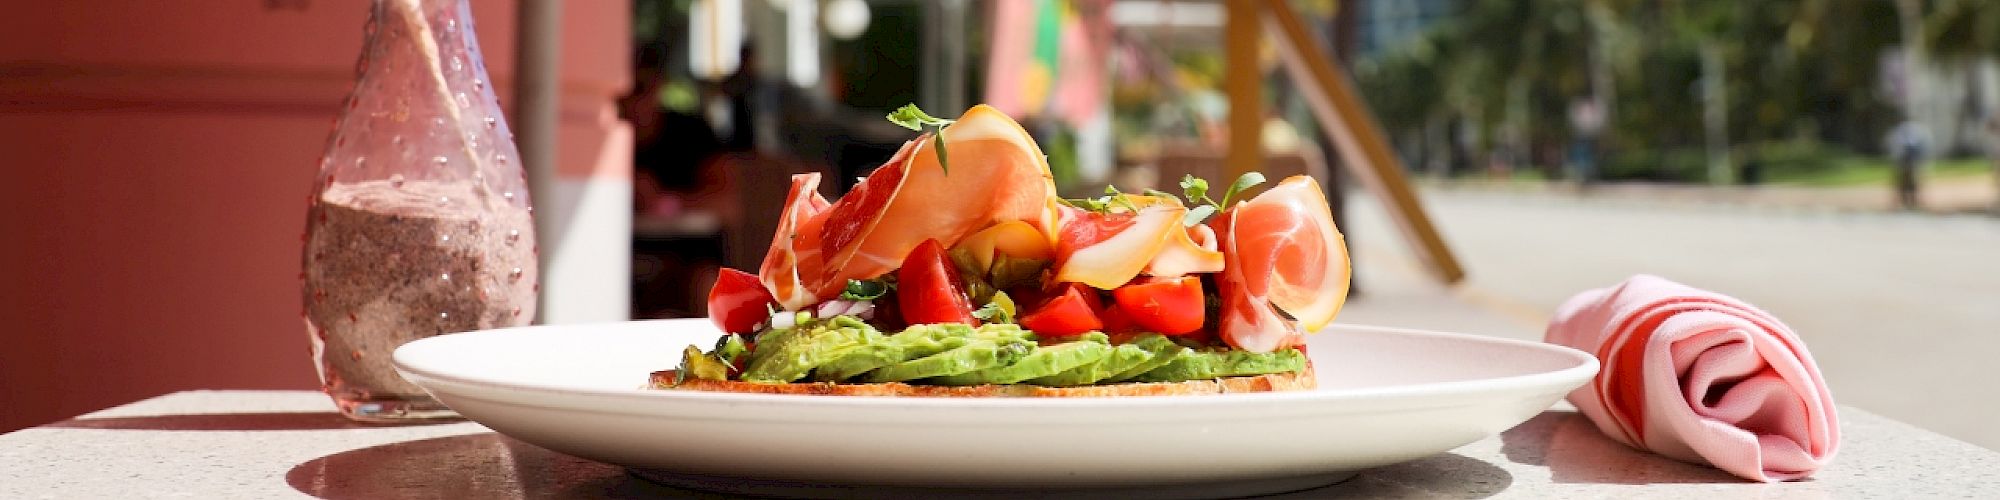 A plate of food is on a table outdoors, featuring avocado toast with toppings. Pink umbrellas and a beachside setting are in the background.